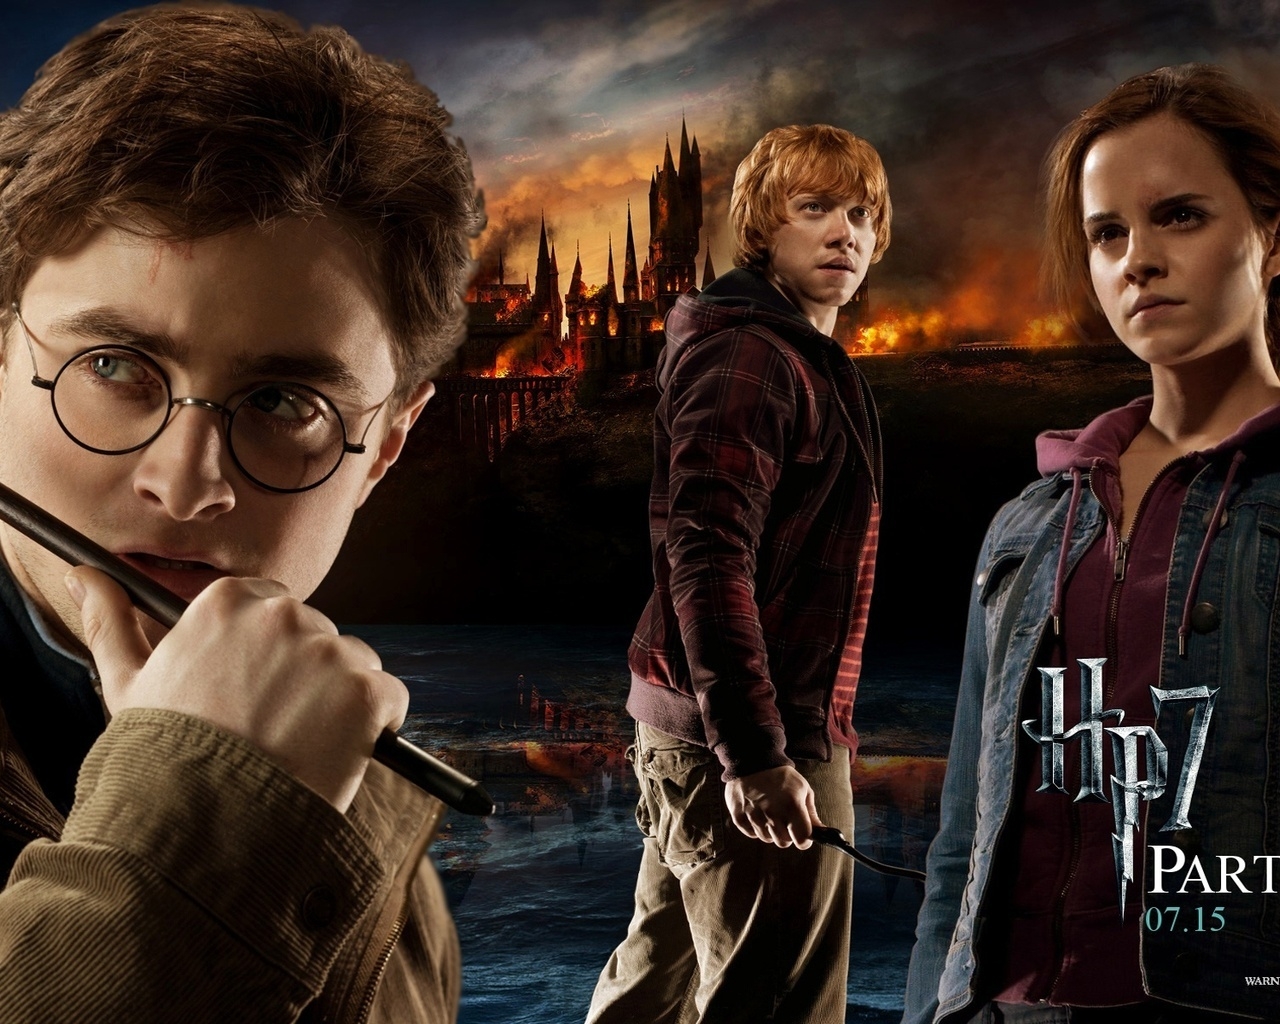 Harry Potter Deathly Hallows Part II for 1280 x 1024 resolution